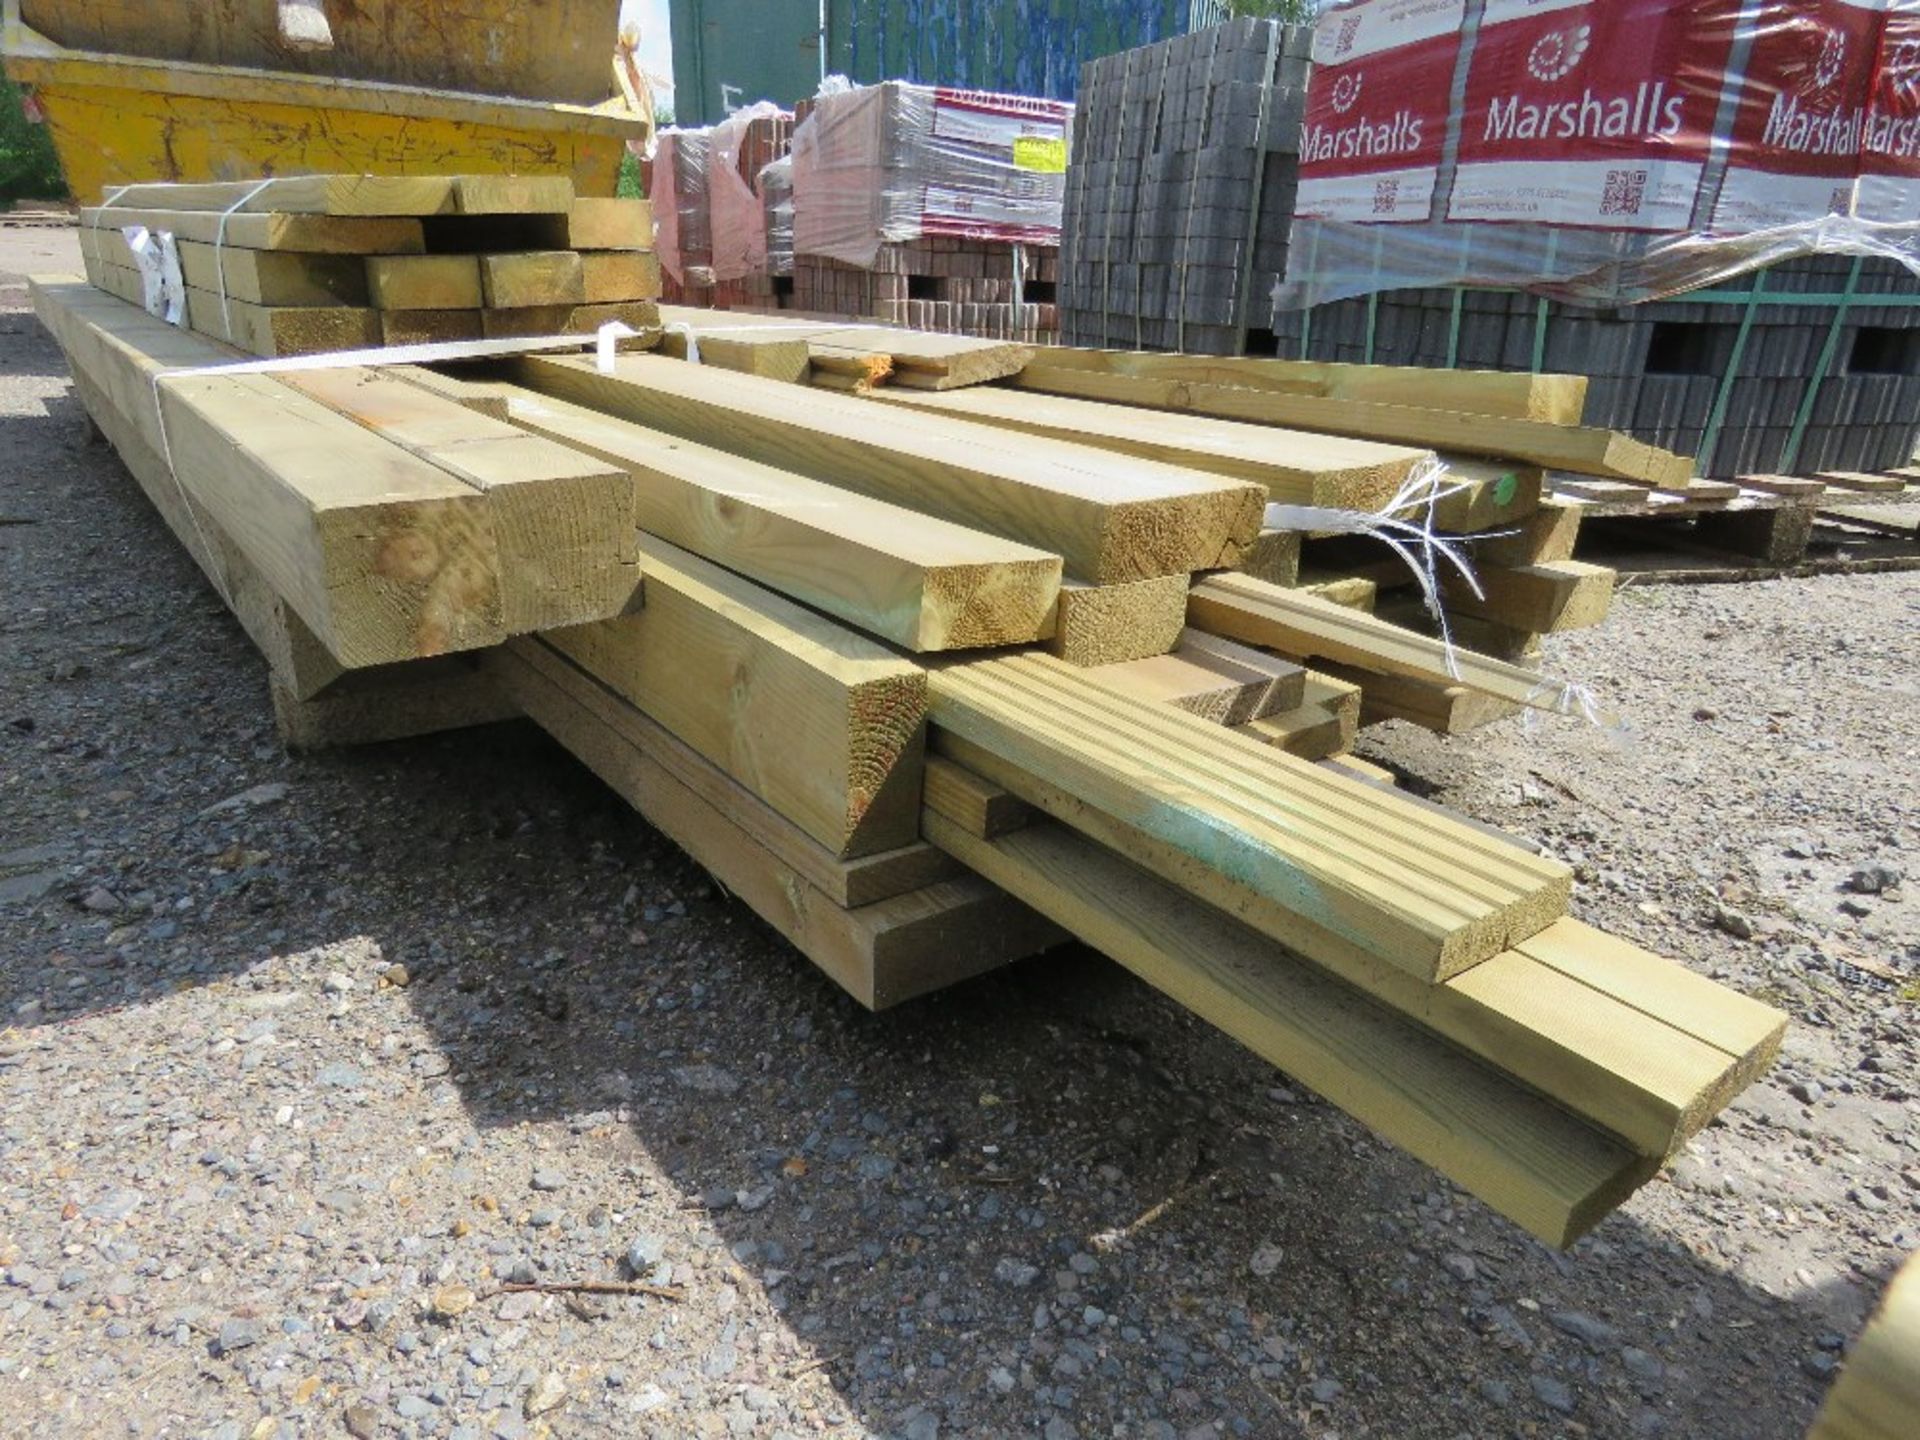 2 X BUNDLES OF TREATED FENCING TIMBERS, POSTS AND BOARDS AS SHOWN, 5-12FT LENGTH APPROX. - Image 2 of 4